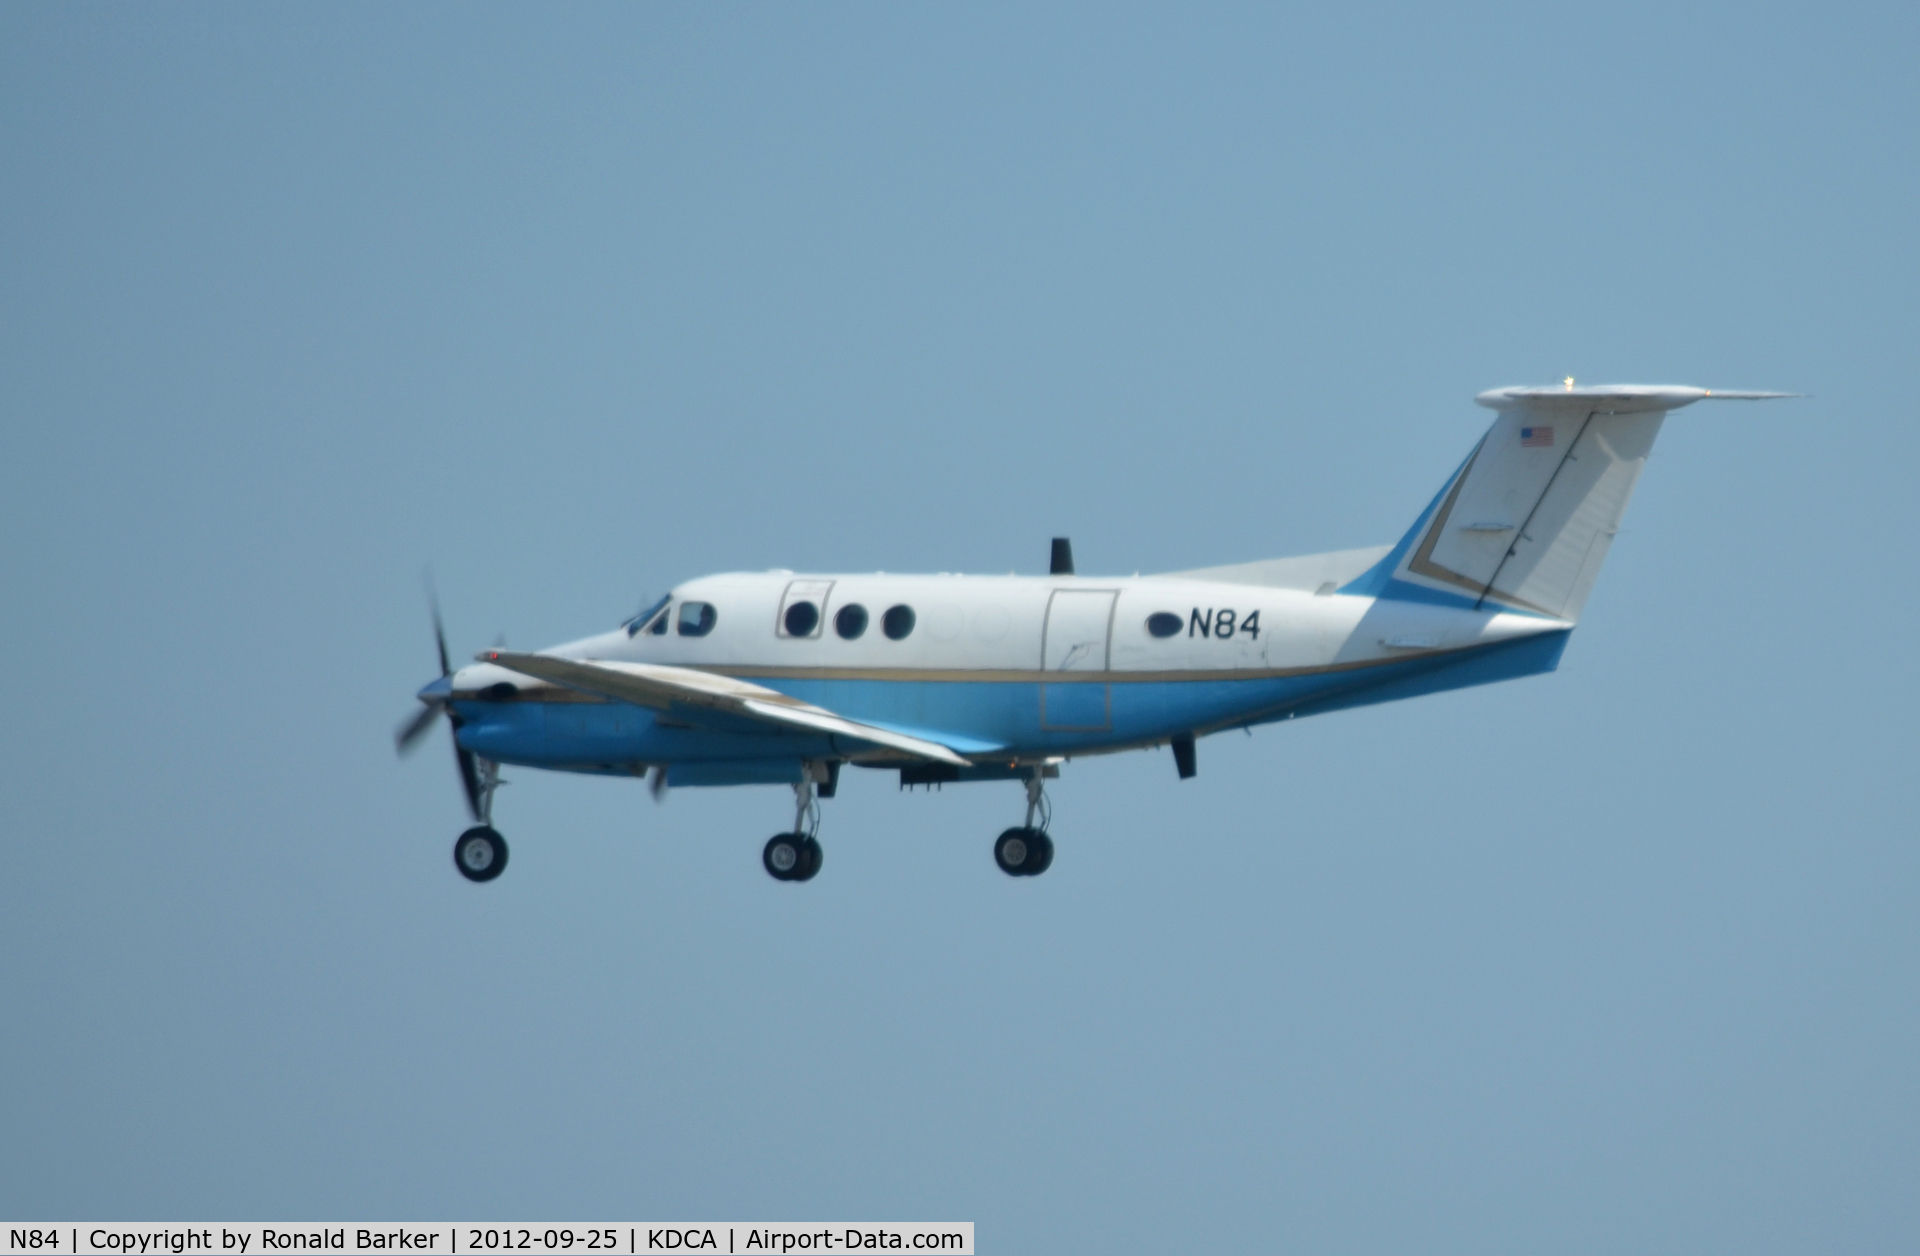 N84, 1988 Beech 300 C/N FF-19, Approach to runway 01 (19 was the active)